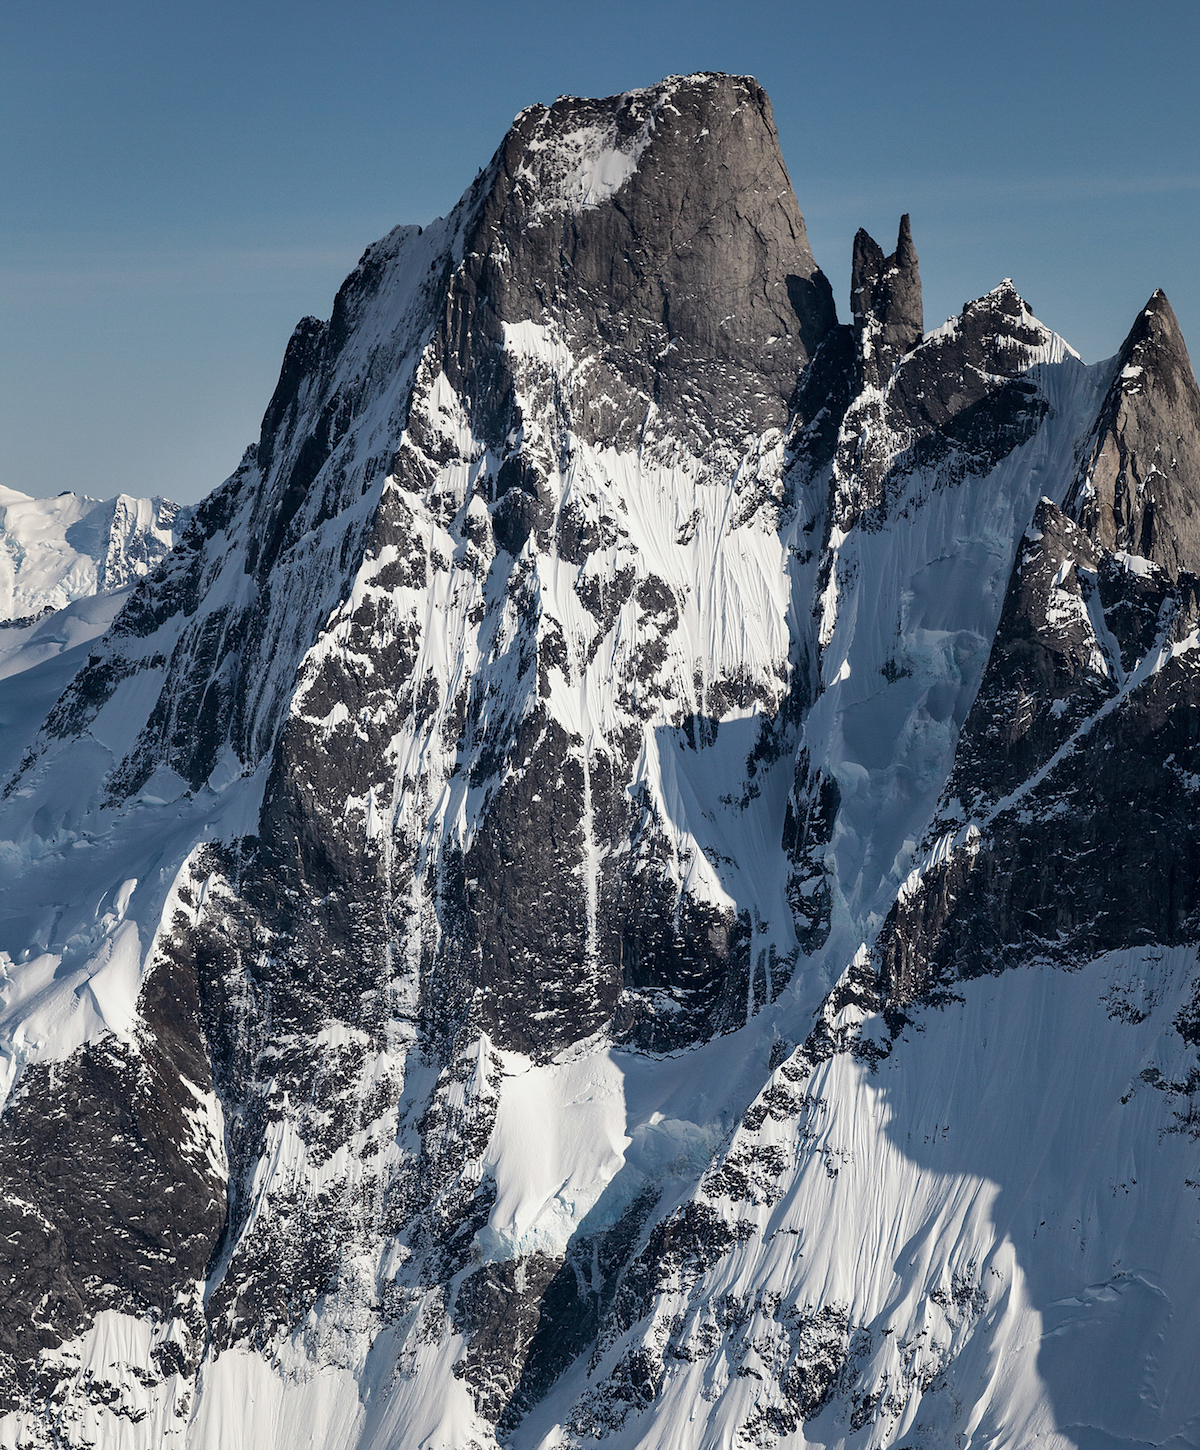 Devils Thumb, North Pillar (left) and northwest face (center). The face has never been climbed in its entirety. As Dieter Klose wrote in the 2003 American Alpine Journal, The wild face, discovered well over two decades ago, ends on a very specific summit. Here are all the makings of both post-modern and futuristic alpinism, yet it simply has not, does not, and seems not to be do-able. [Photo] John Scurlock